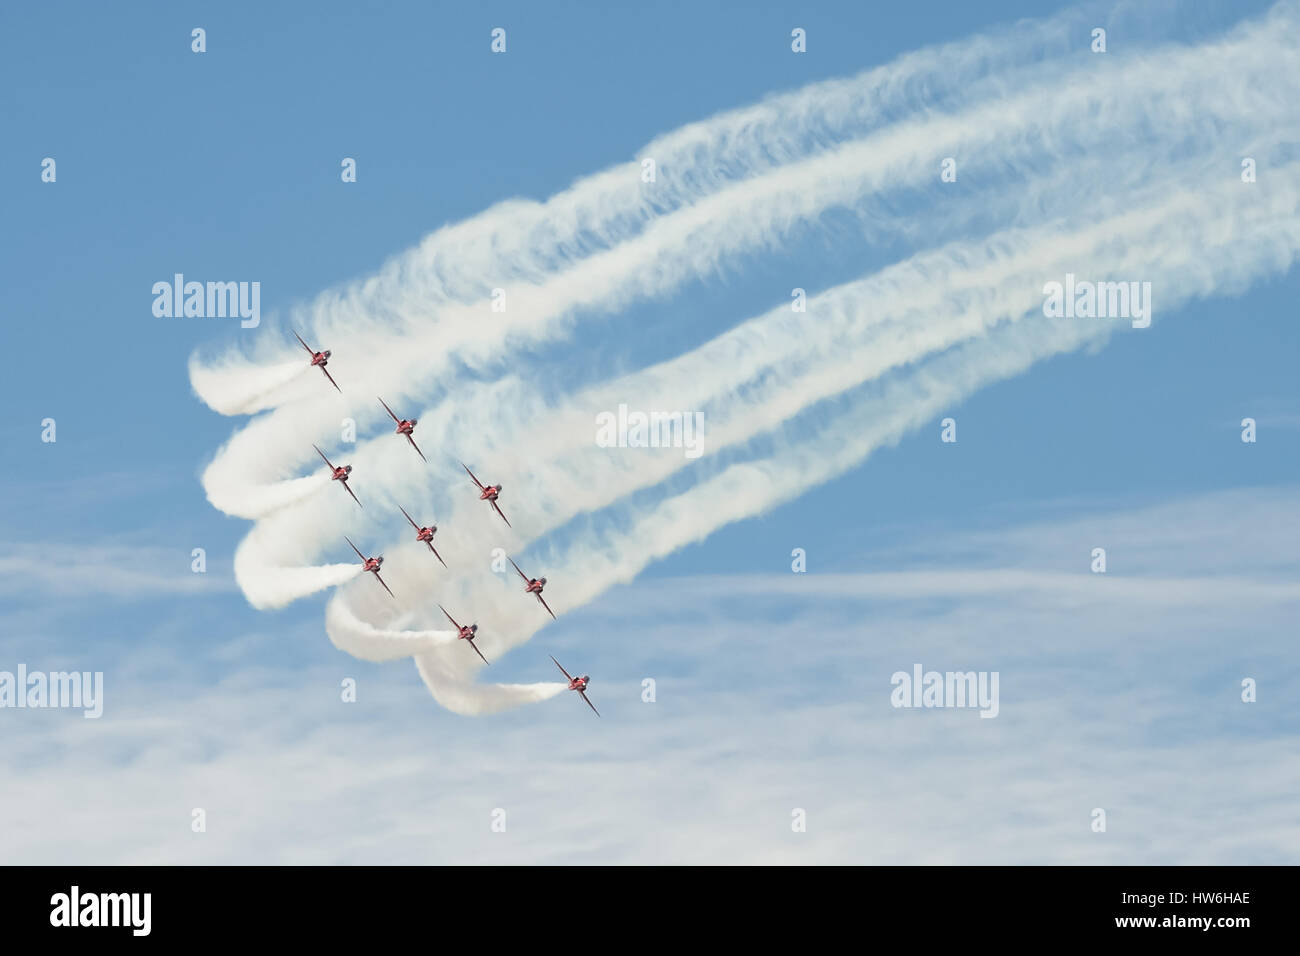 Precision maneuver by the Red Arrows aerobatic display team during the Farnborough Airshow, UK Stock Photo